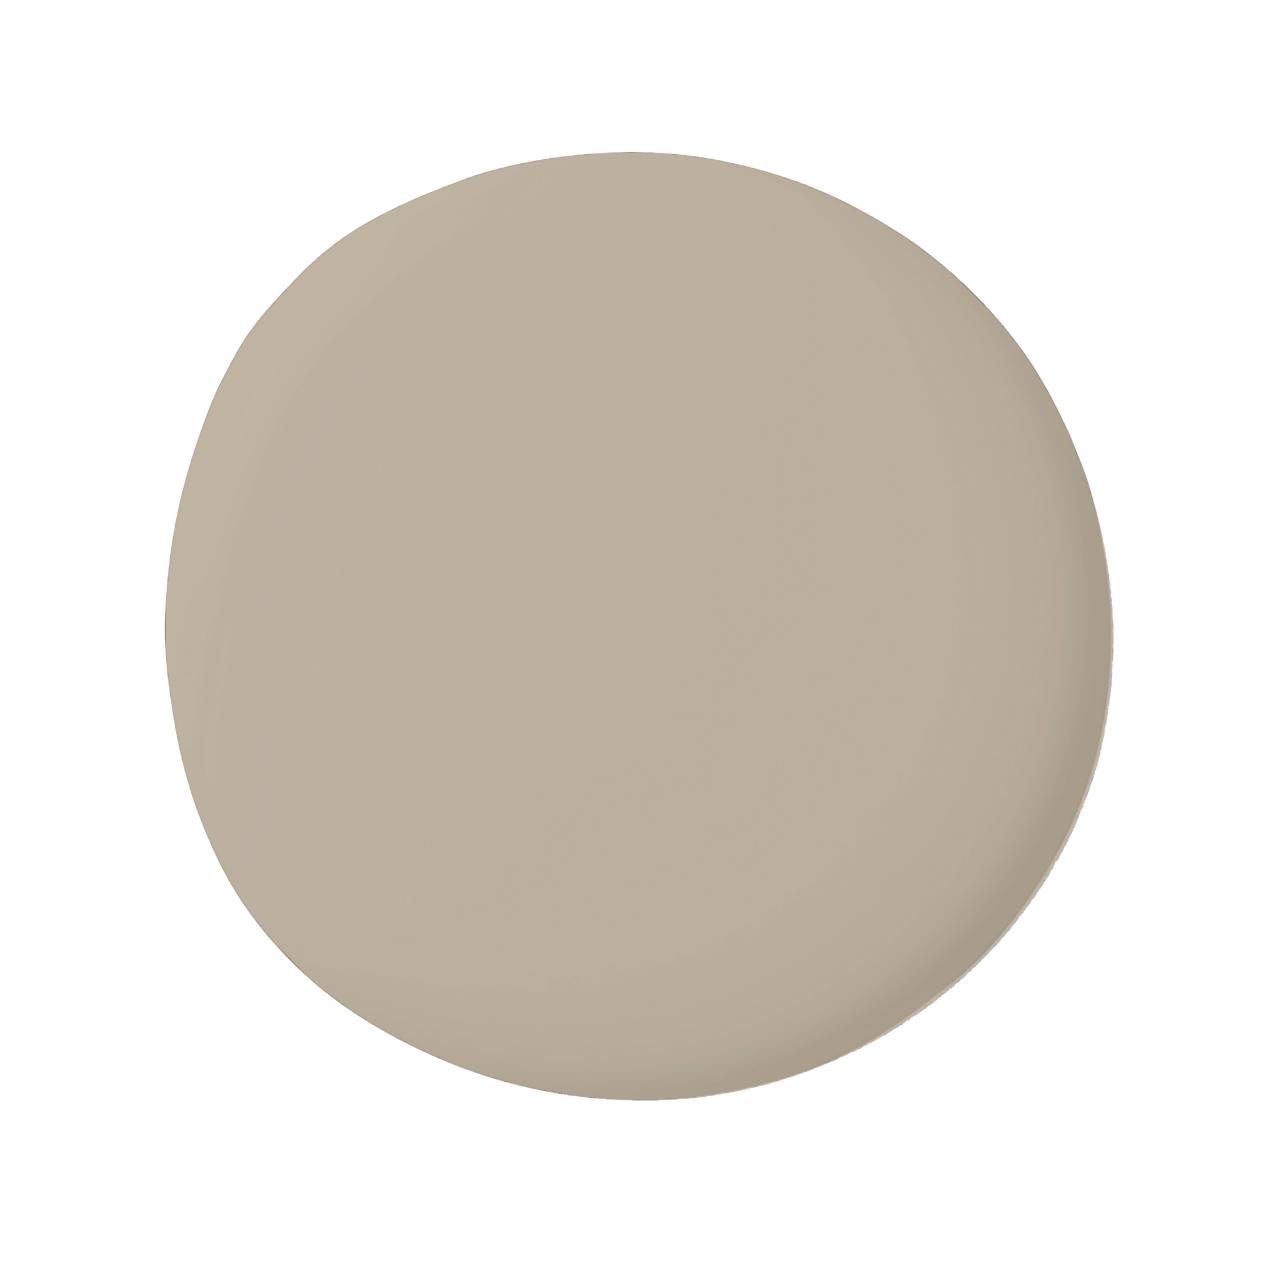 Neutral Earthy Warm Cream Vanilla Beige - Plain Solid Block Colors - Subtle  Colours / Natural Shades / Nature / Sand / Stone Yoga Mat by Color Match @  Society6, Solid Plain Blo